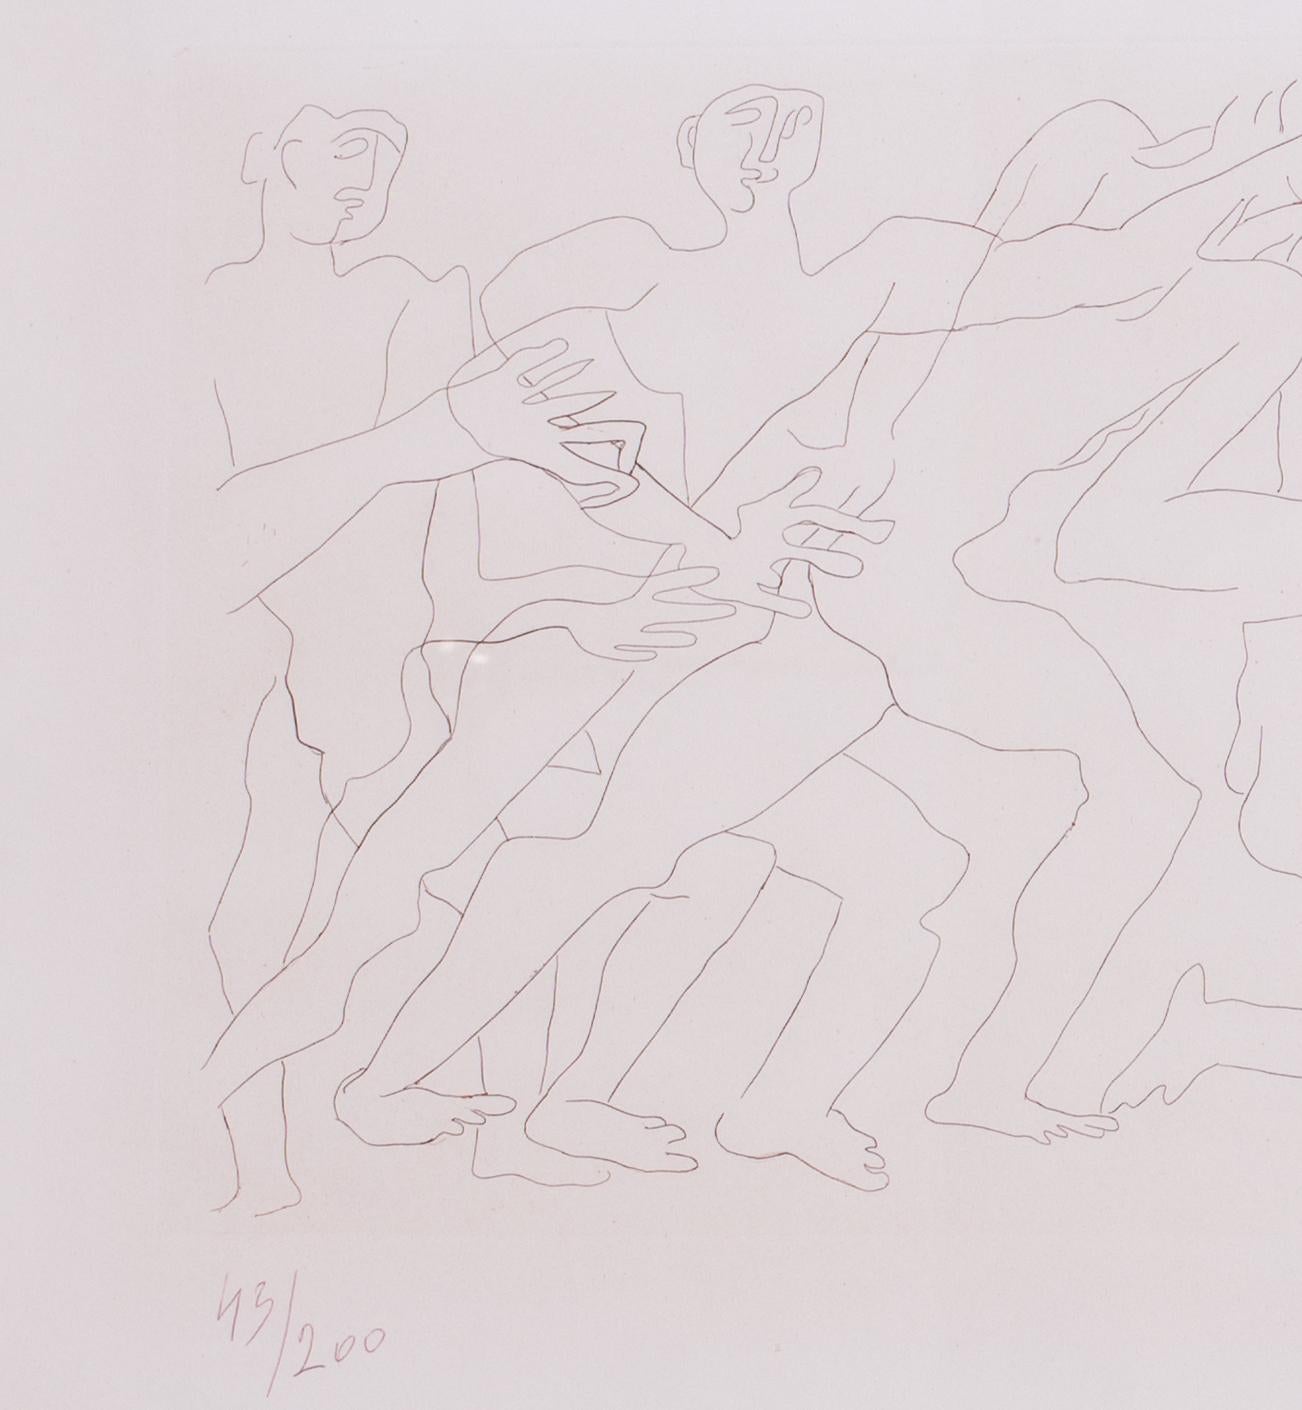 Ossip Zadkine (Russian / French, 1890 – 1967)
La Masse, 1964
Serigraph, 43 / 200
Signed and dedicated (lower right)
